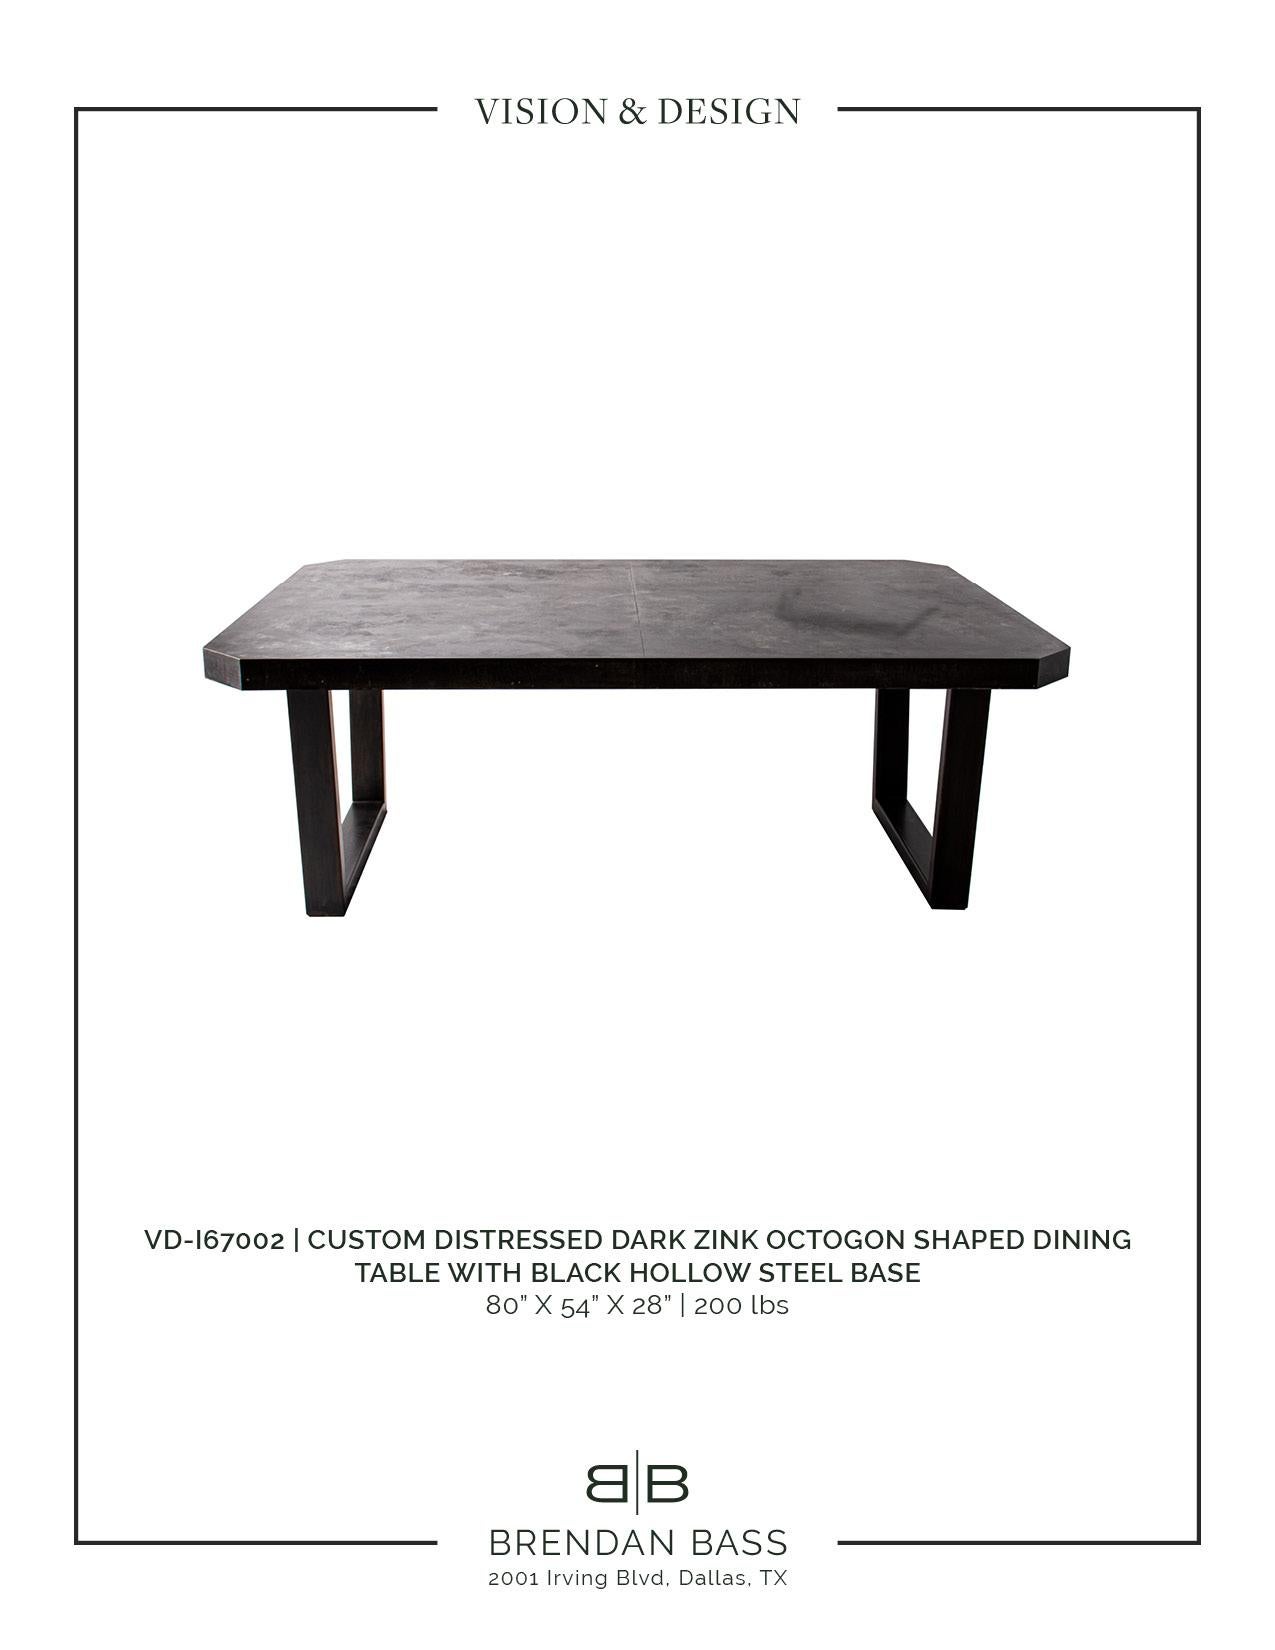 Contemporary Zinc Octogon Dining Table with Black Hollow Steel Base For Sale